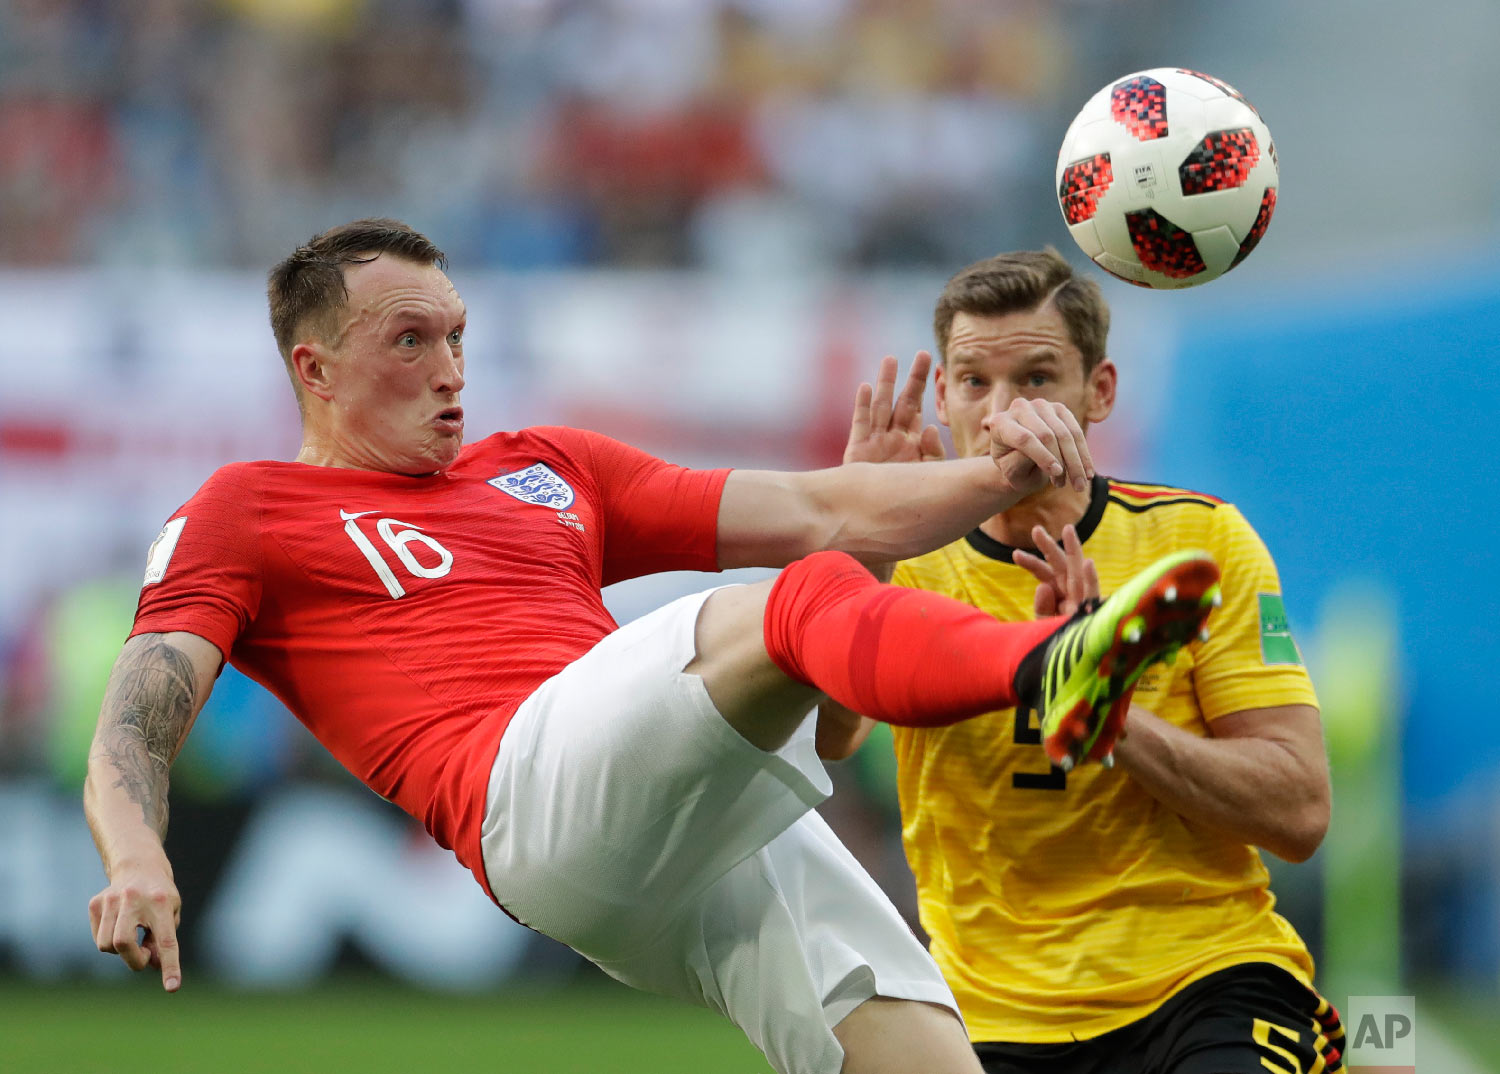  England's Phil Jones left controls a ball in front of Belgium's Jan Vertonghen during the third place match between England and Belgium at the 2018 soccer World Cup in the St. Petersburg Stadium in St. Petersburg, Russia, Saturday, July 14, 2018. (A